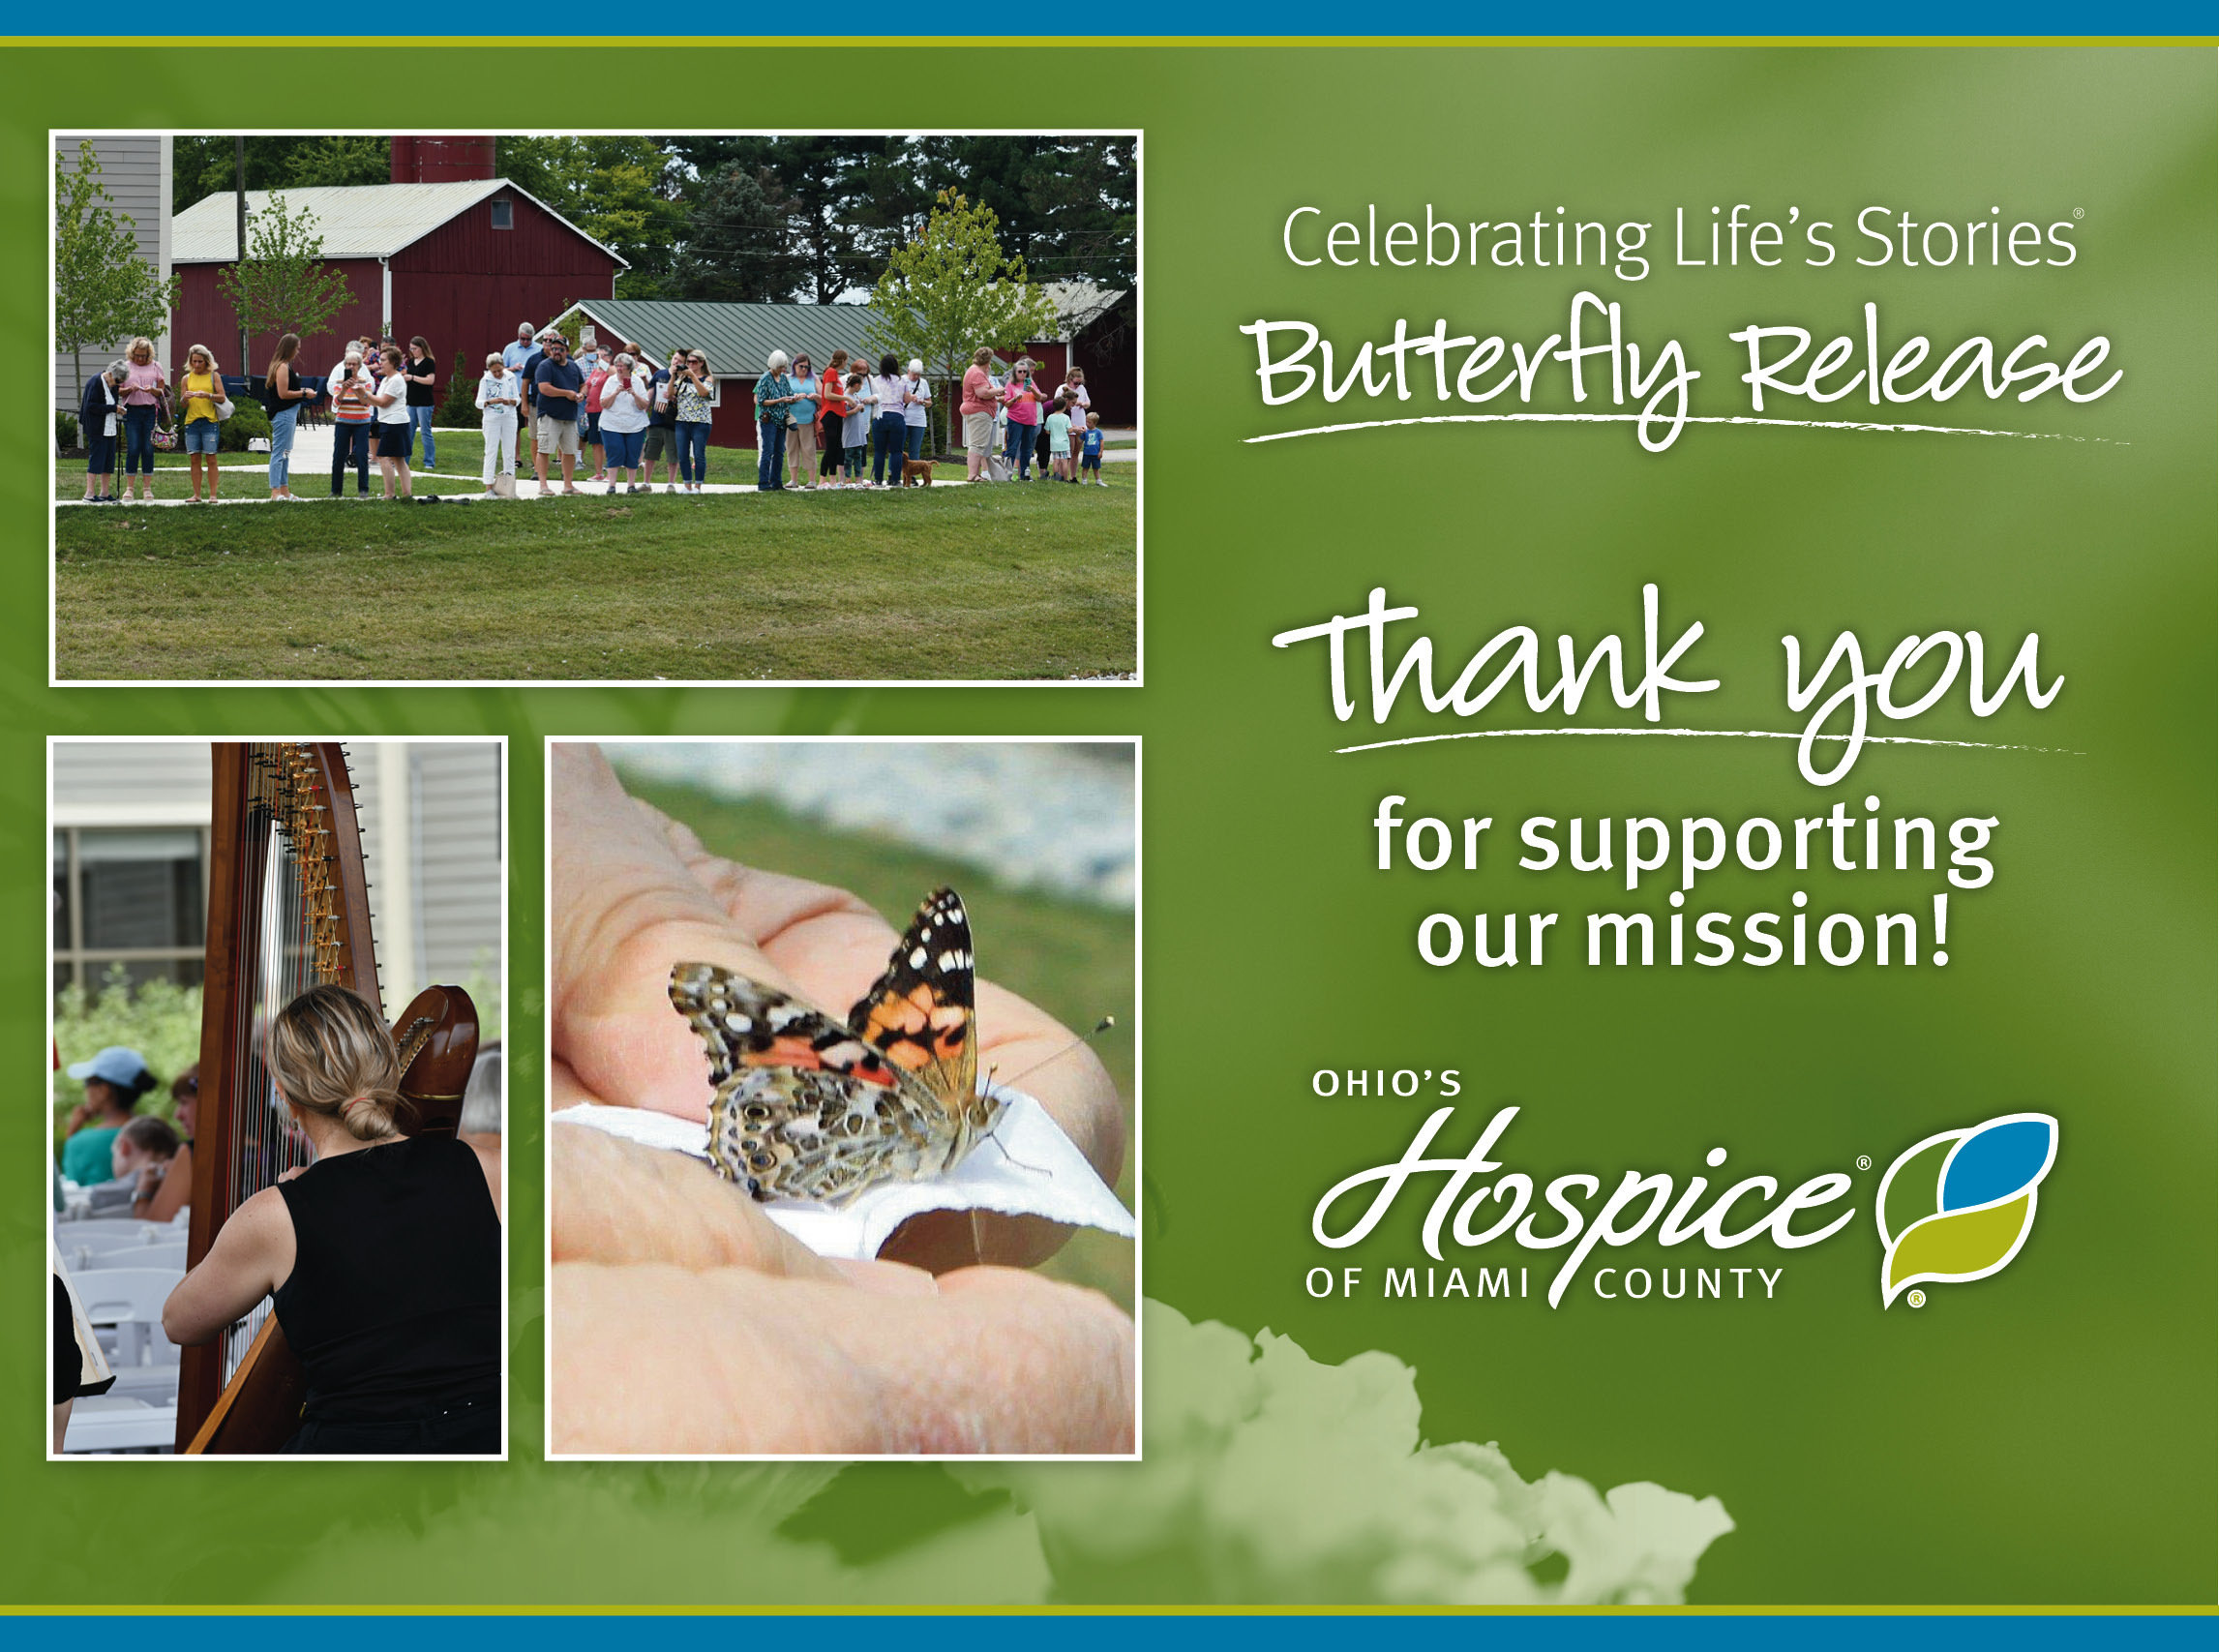 Ohio's Hospice of Miami County Butterfly Release Raises Funds